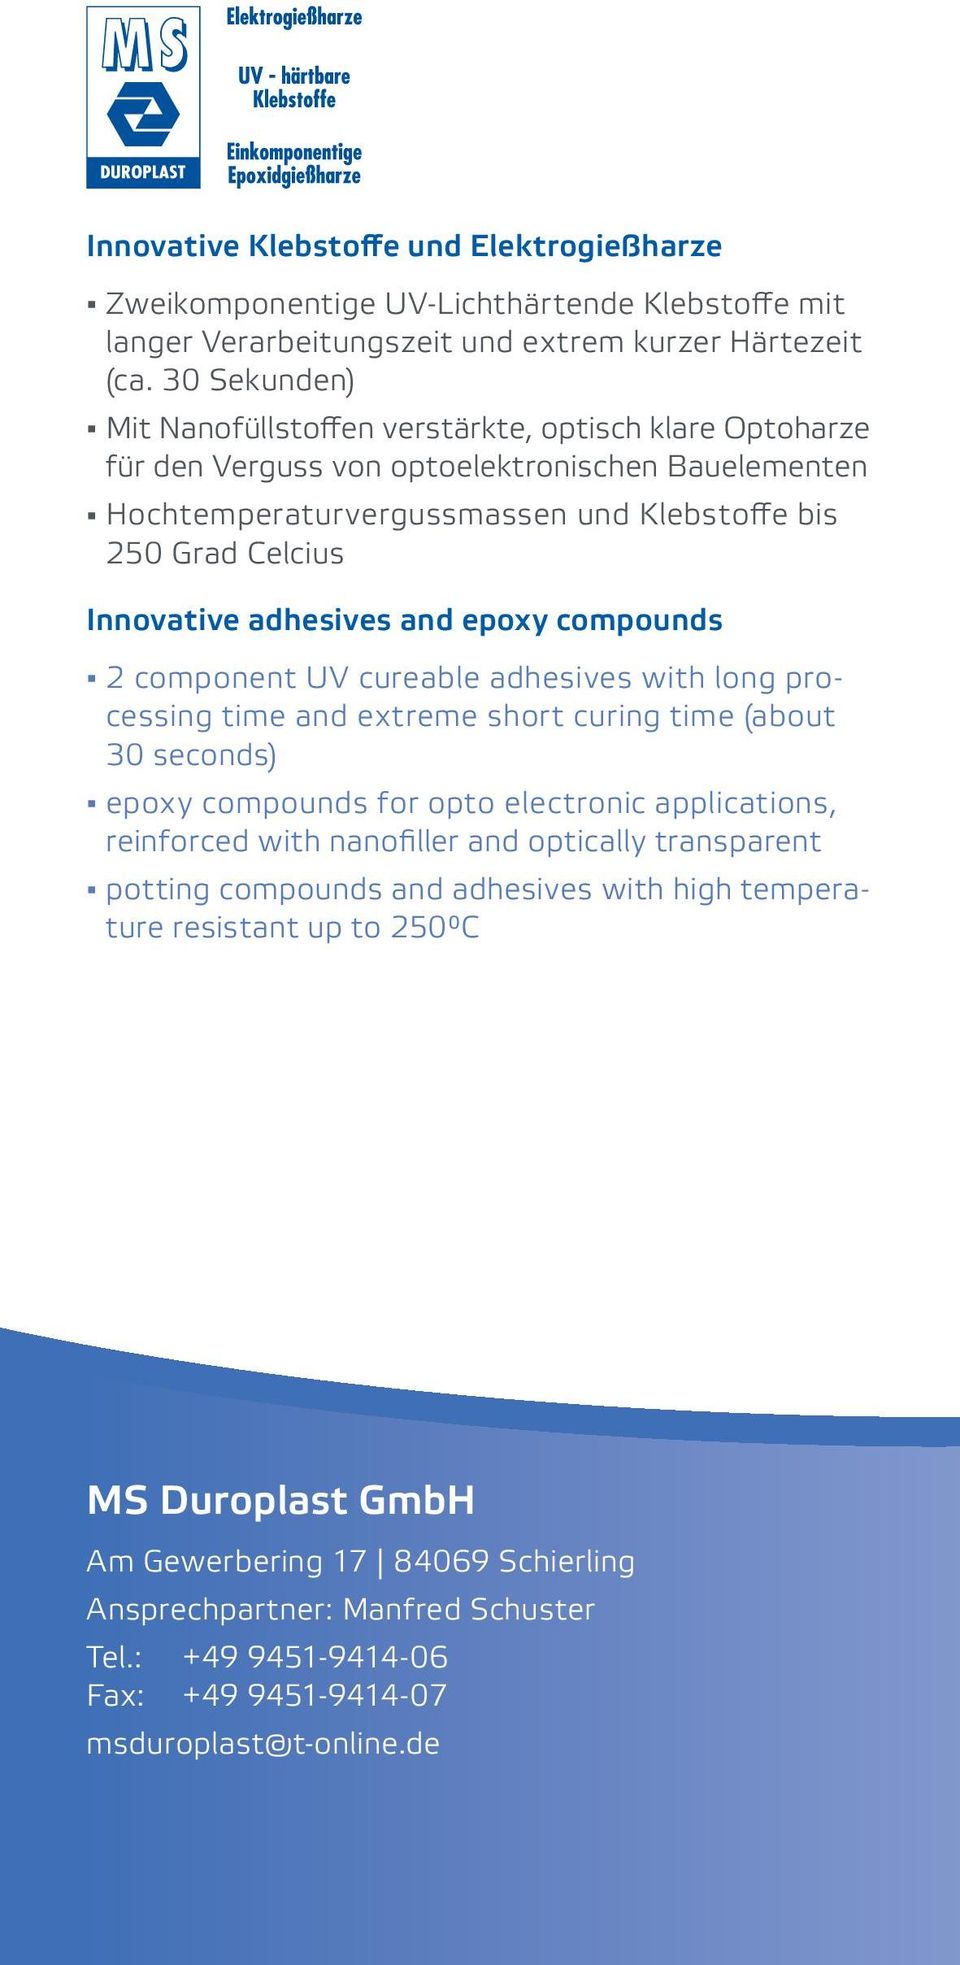 adhesives and epoxy compounds 2 component UV cureable adhesives with long processing time and extreme short curing time (about 30 seconds) epoxy compounds for opto electronic applications, reinforced